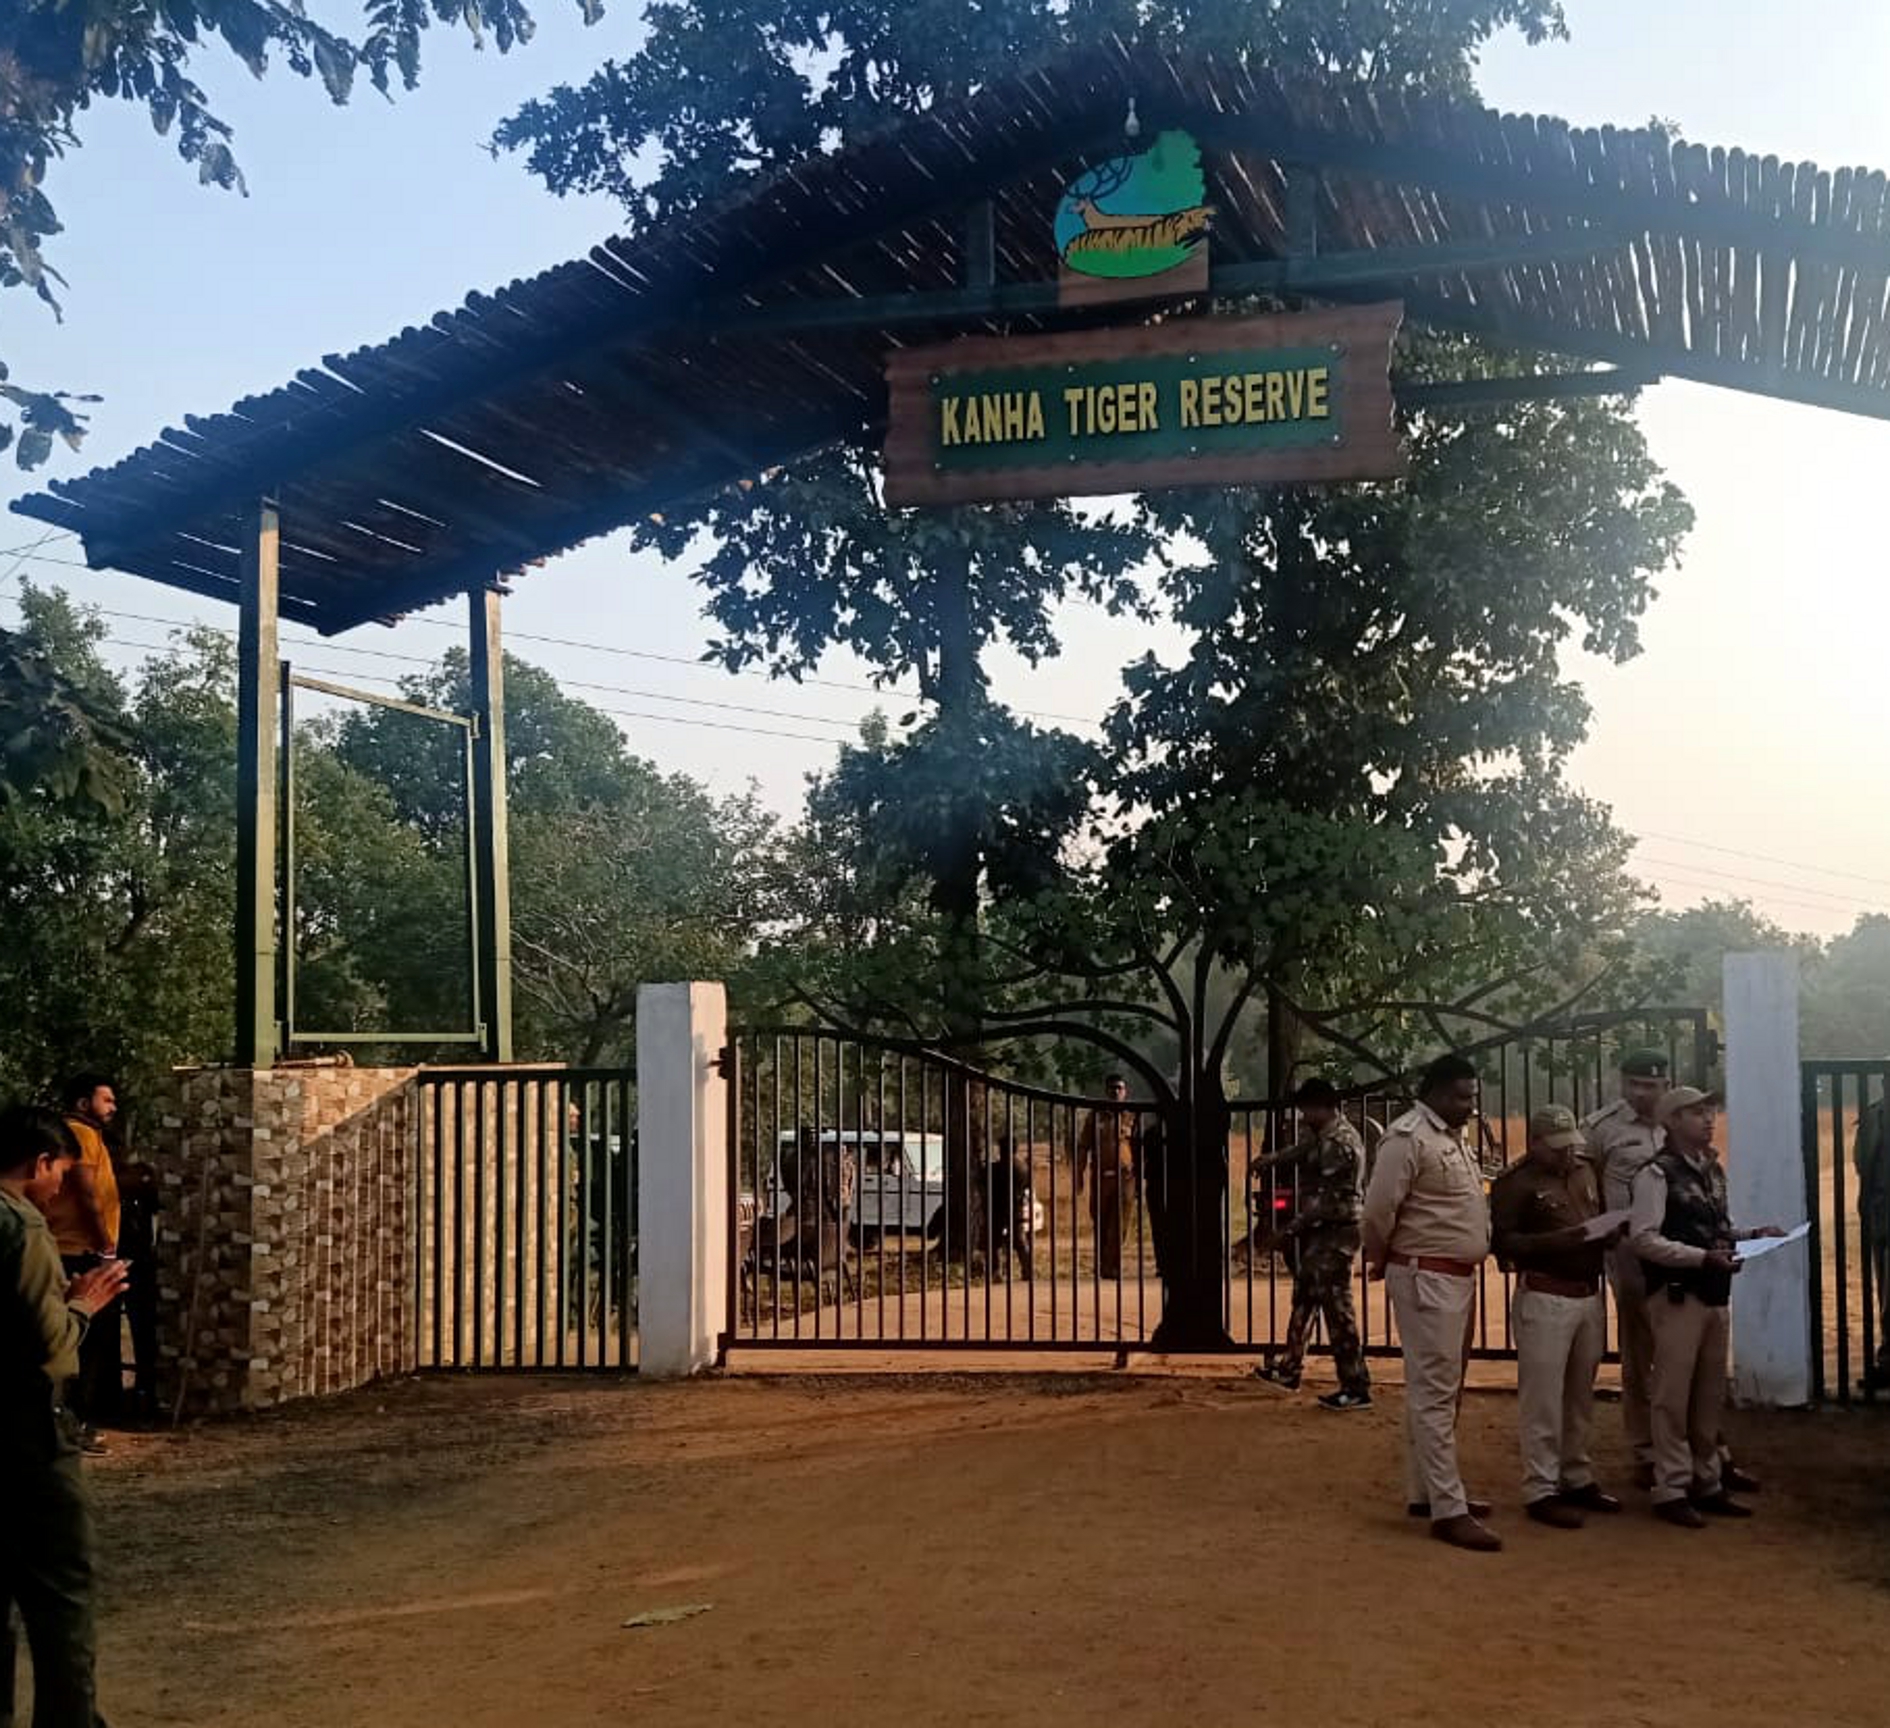 The tourists are getting away from the Sarahi Gate of Kanha